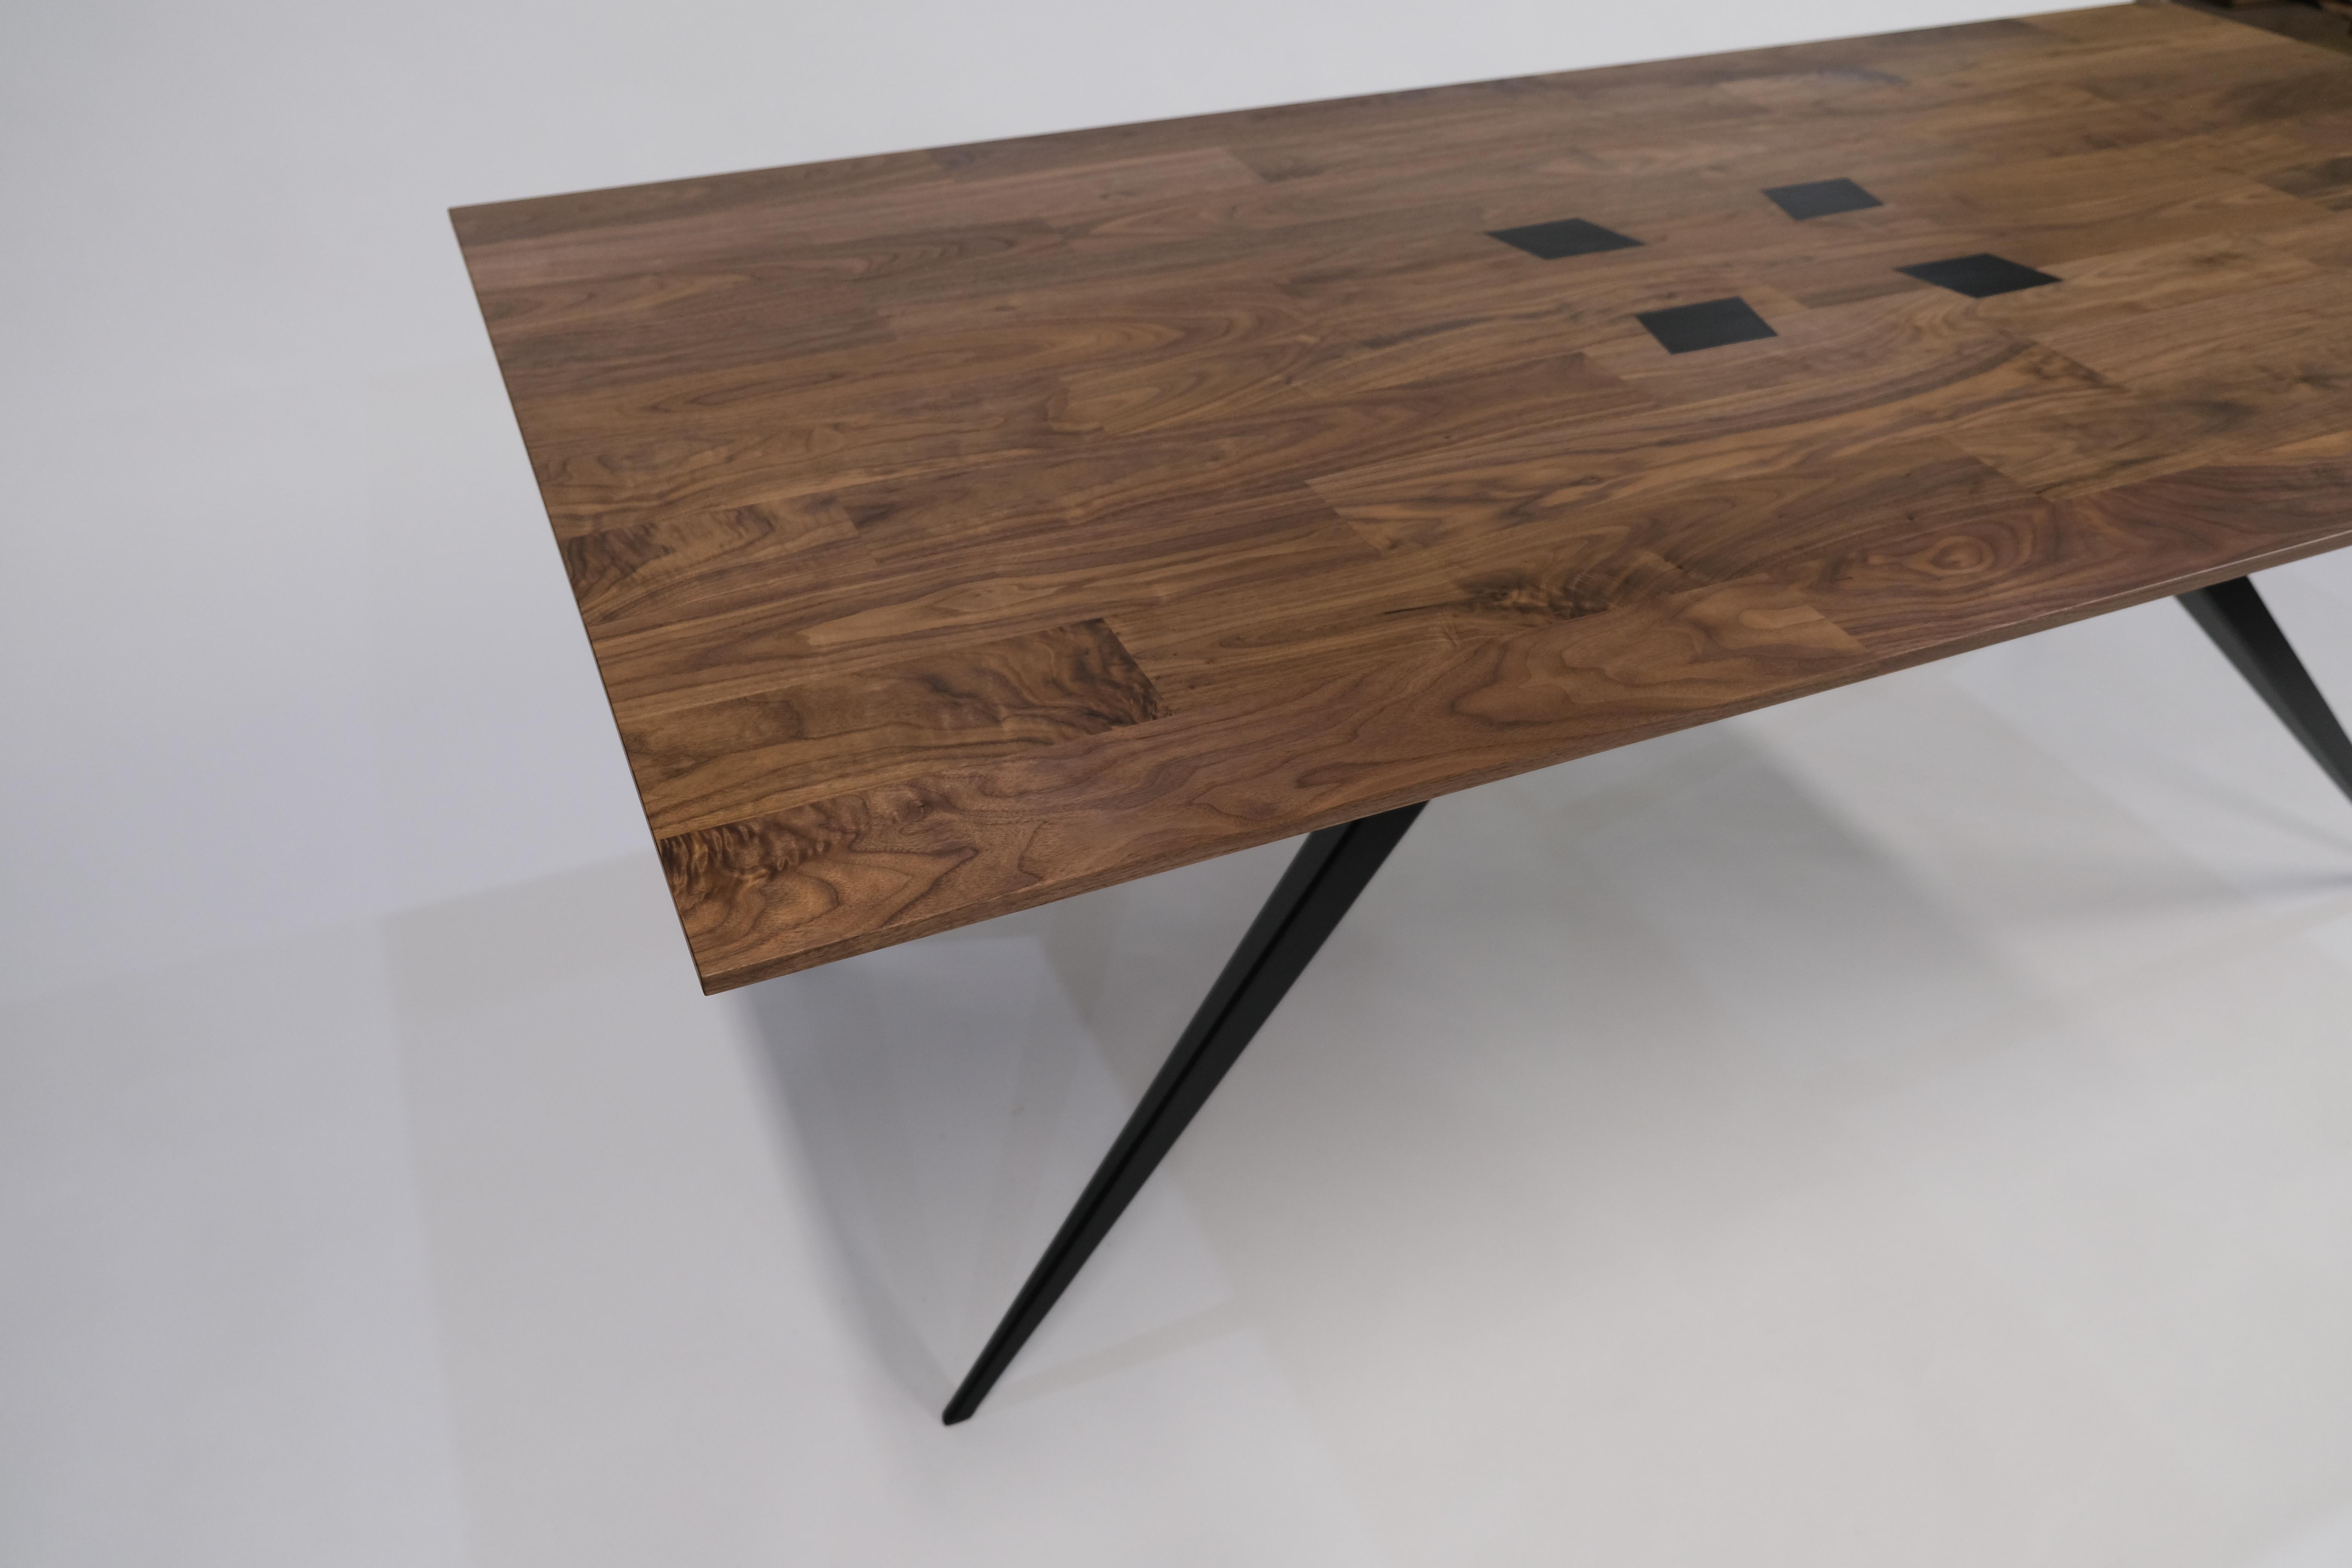 This solid walnut tabletop is beveled down to a delicate edge, and is pierced with tapered steel legs that solidly rest on the floor. 

The black finish of the steel leg tops meet the walnut hand oiled finish of the tabletop to create a flush